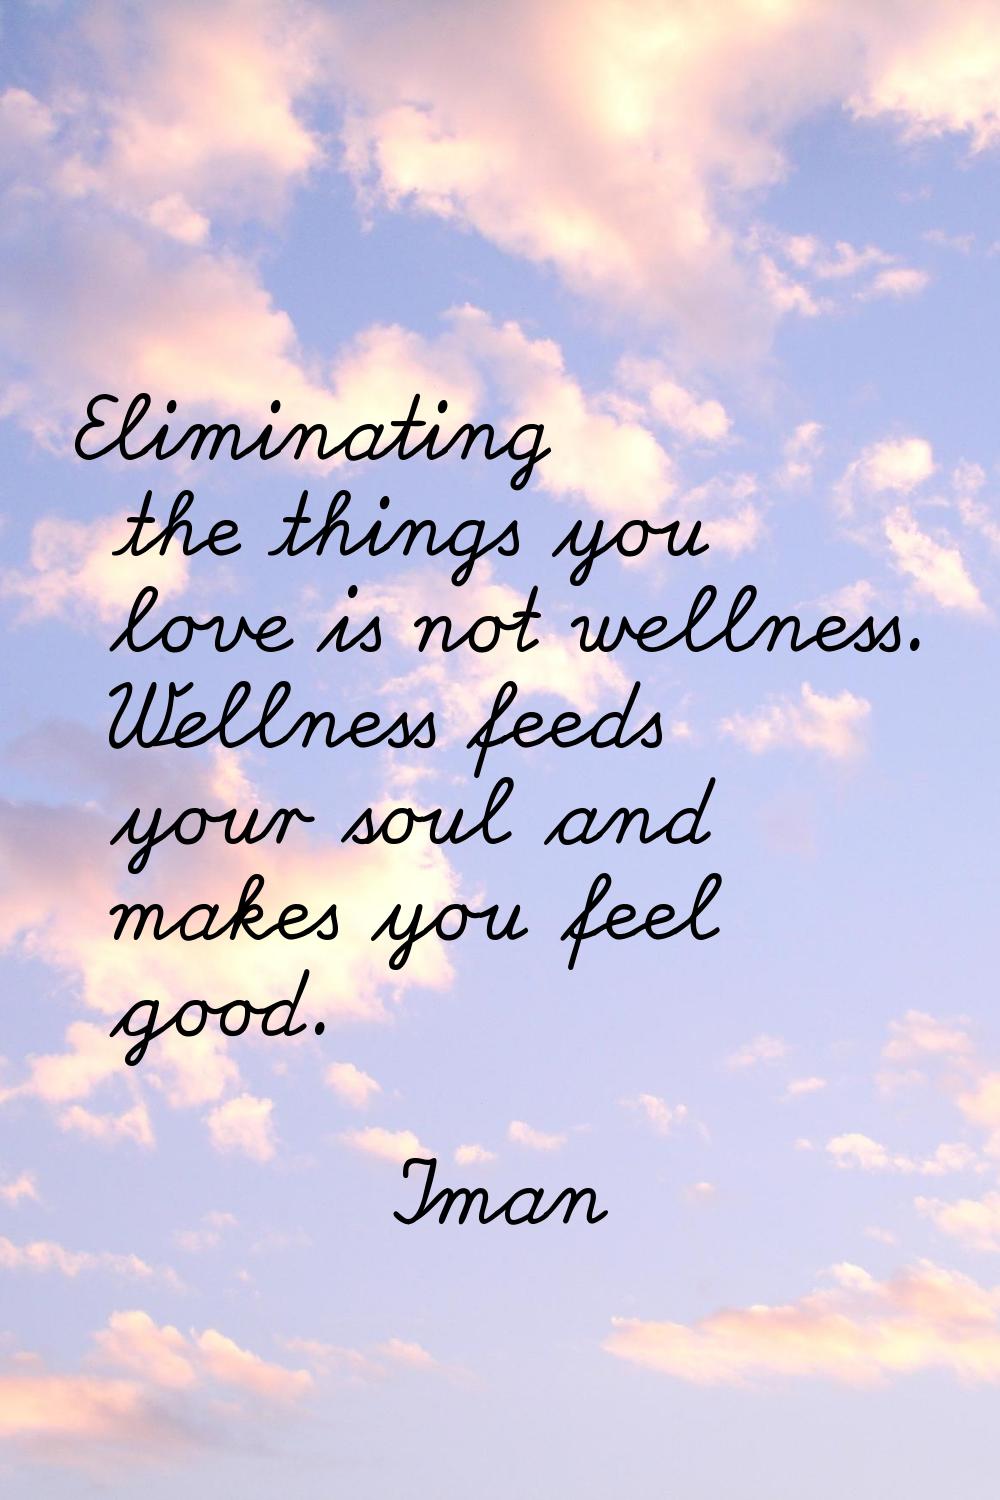 Eliminating the things you love is not wellness. Wellness feeds your soul and makes you feel good.